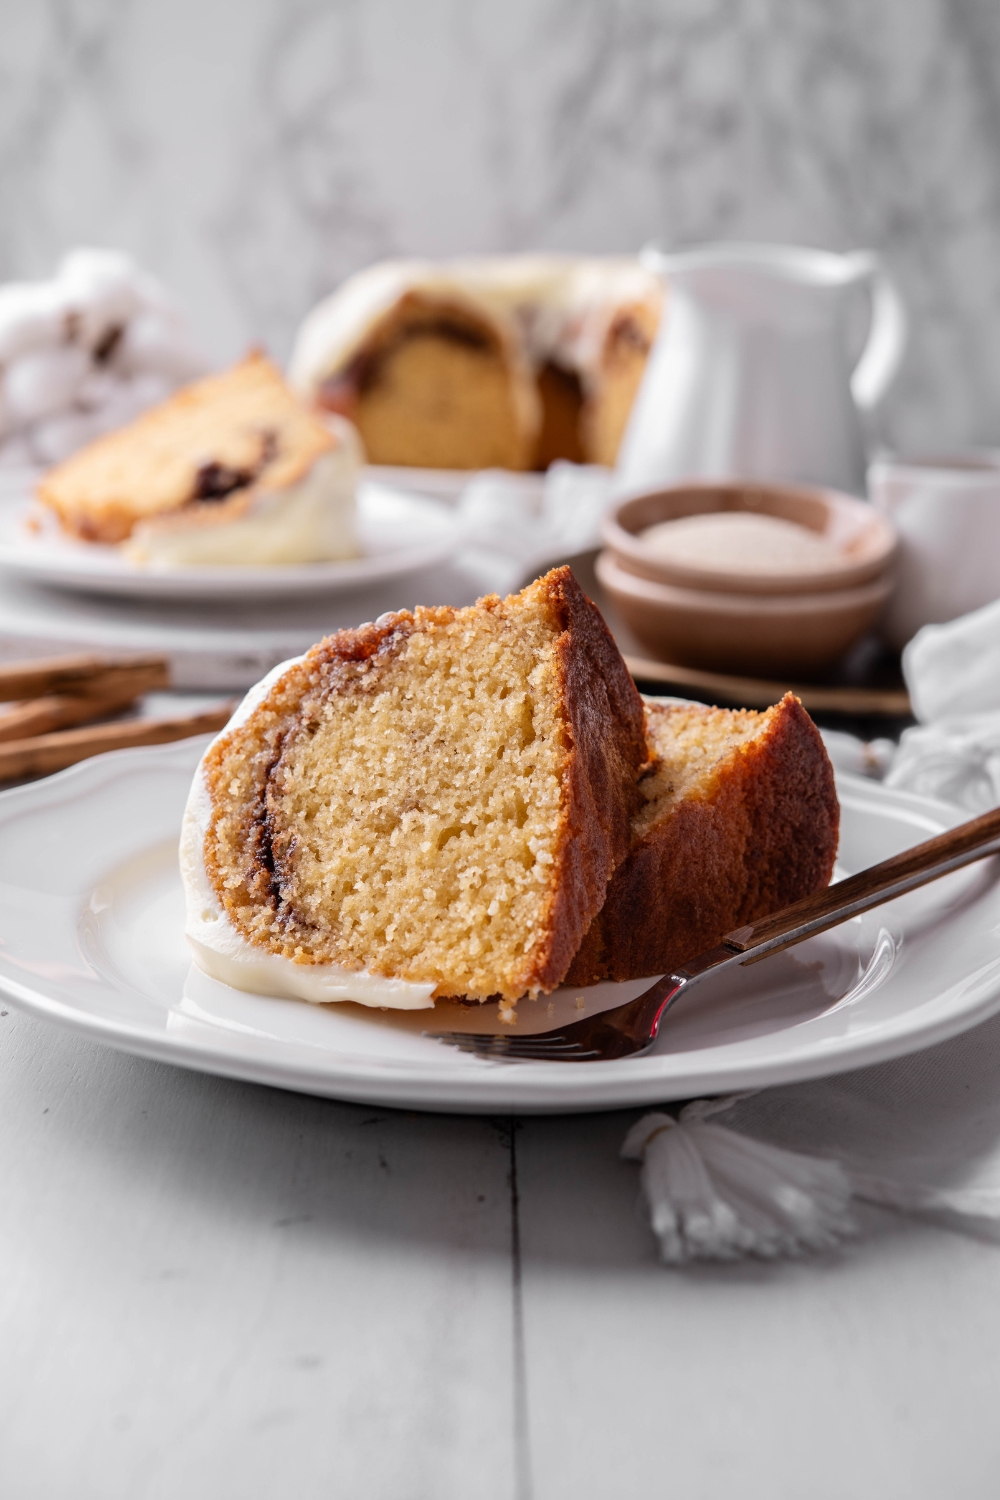 Two pieces of cinnamon bundt cake are on a white plate. There is a fork on the plate. Another piece of cake is on a plate in the background.